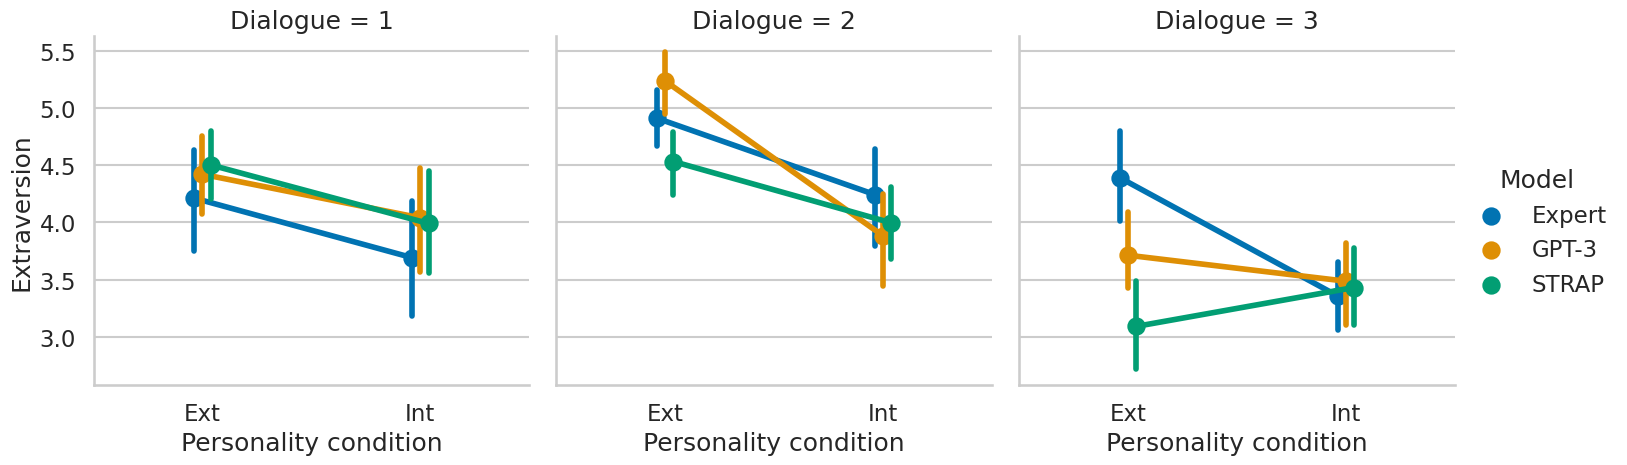 Extraversion rating in the text-only study for each model x personality combination across each of our three different dialogues, shown on a scale from 0 to 6. Better as the Ext score gets higher than the Int score. Error bars are given by confidence interval.